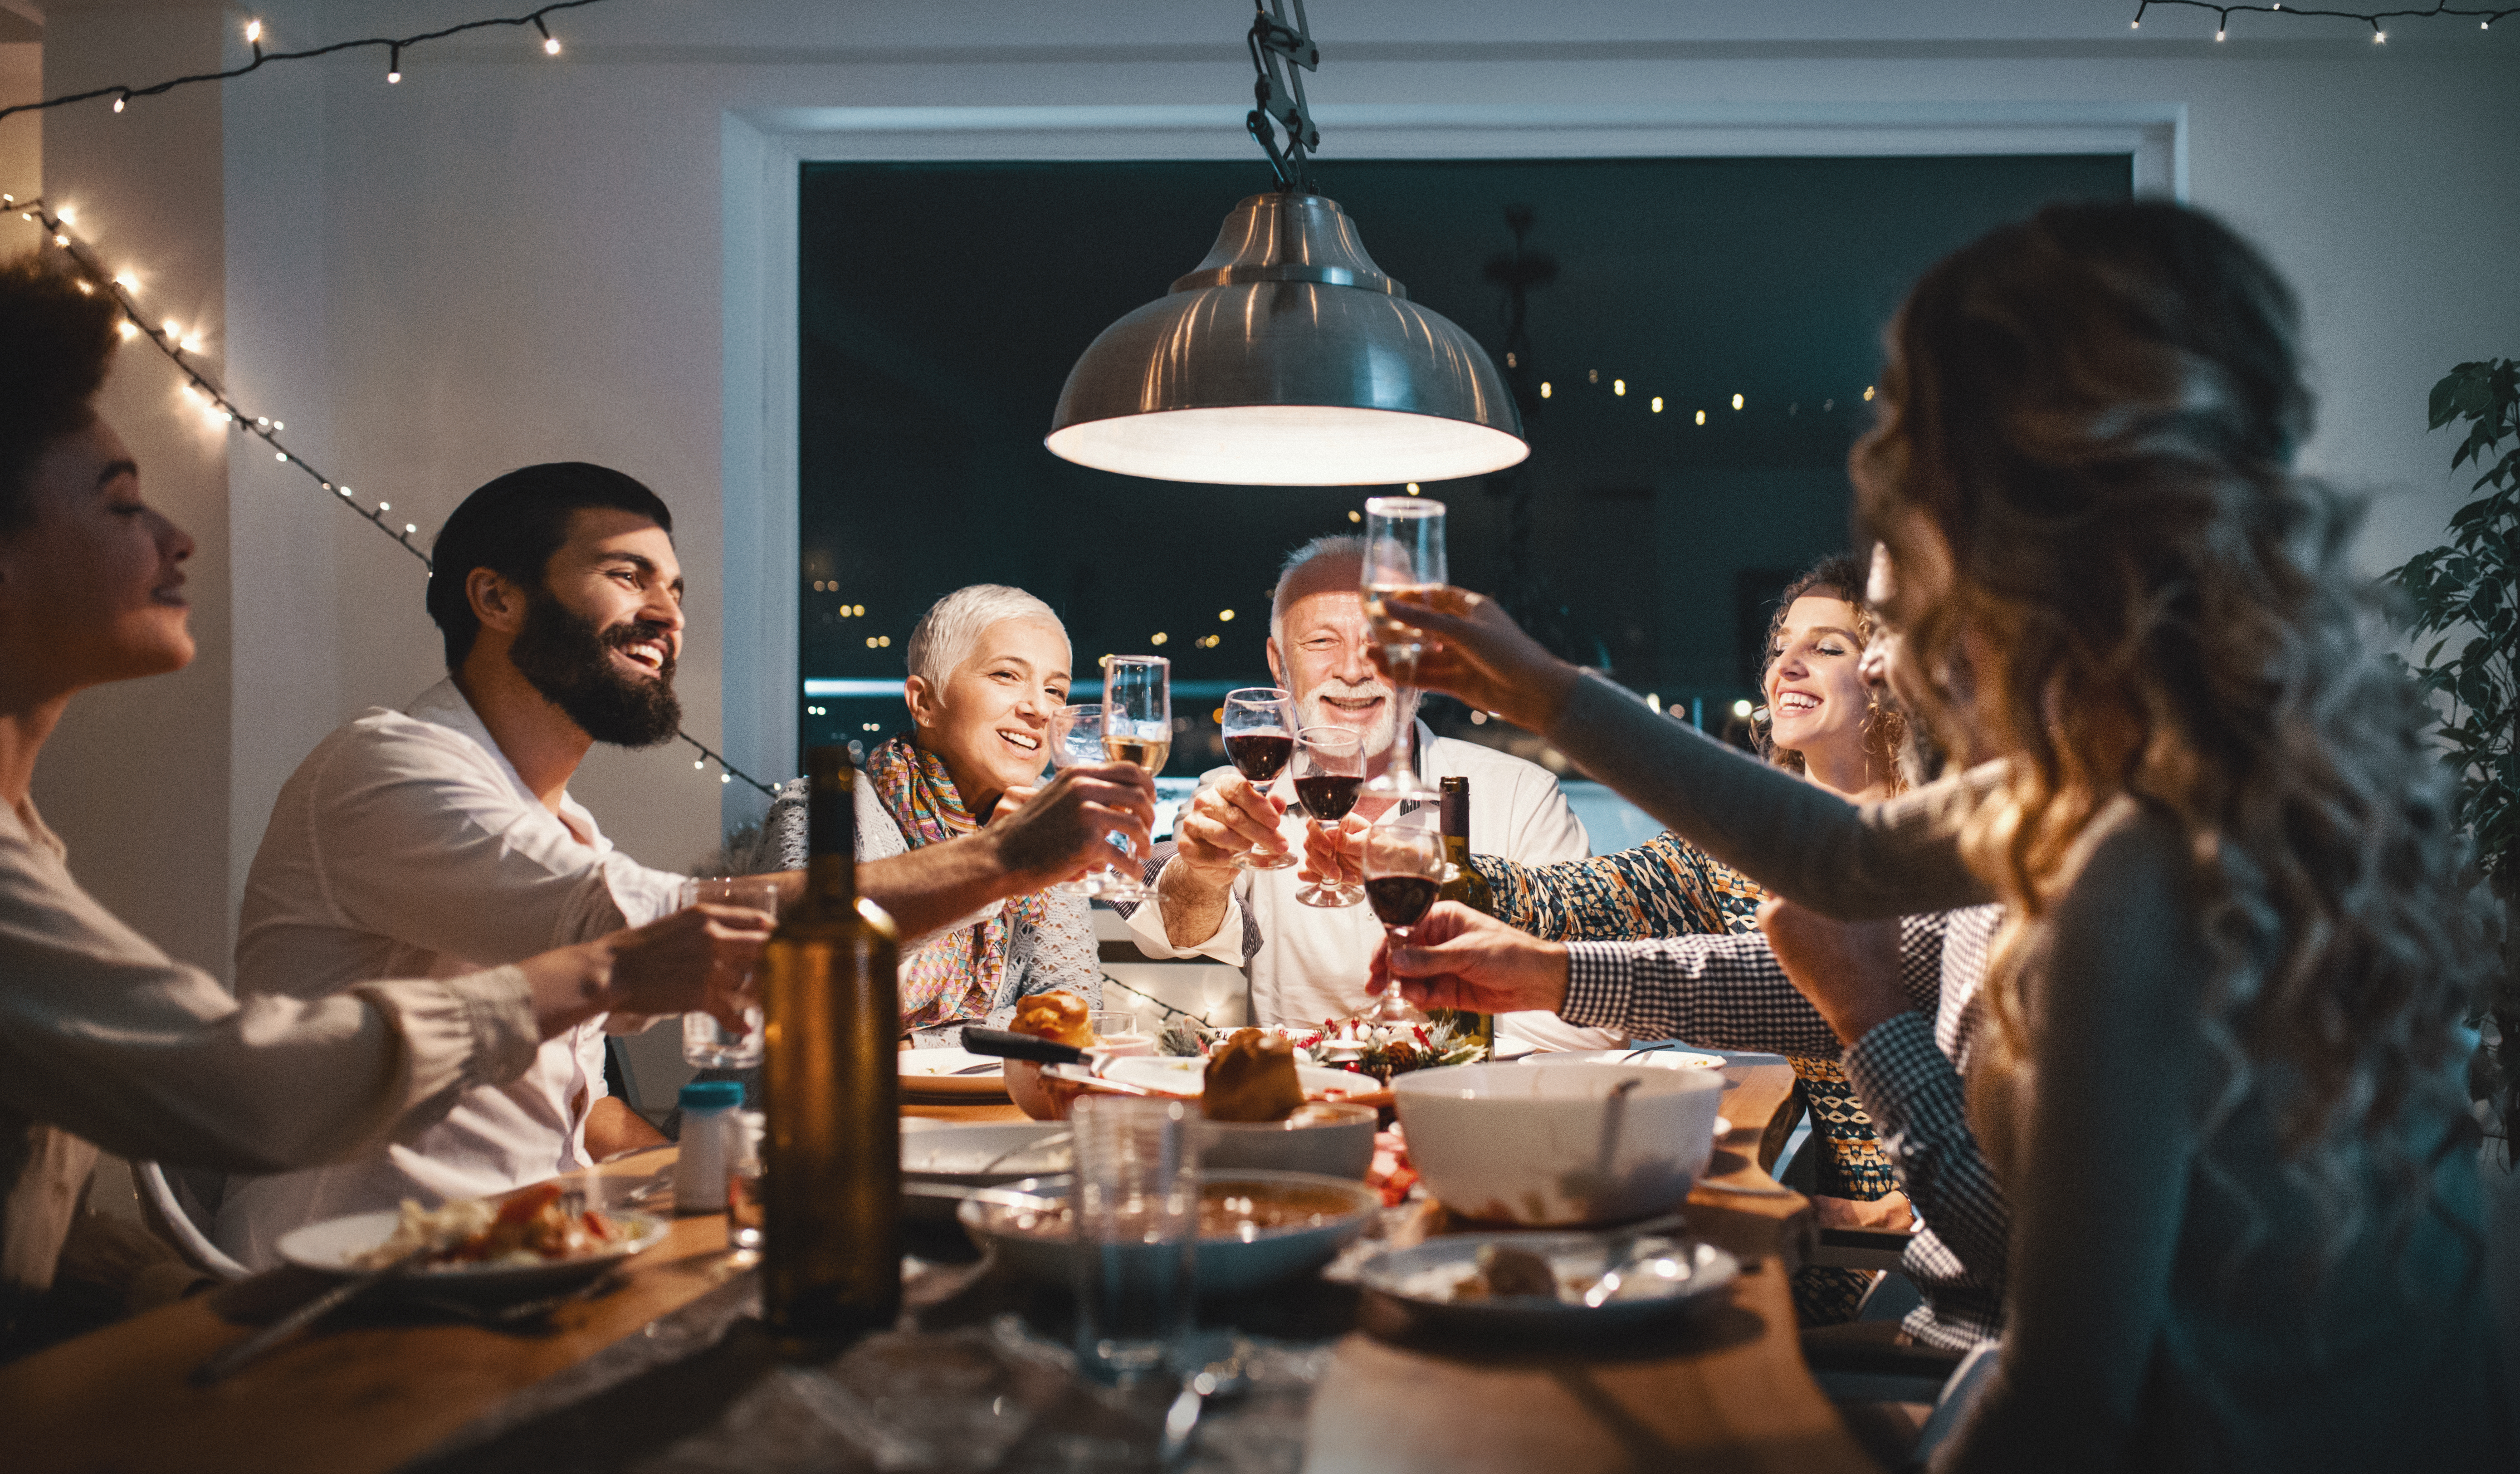 A family toasting during dinner | Source: Getty Images